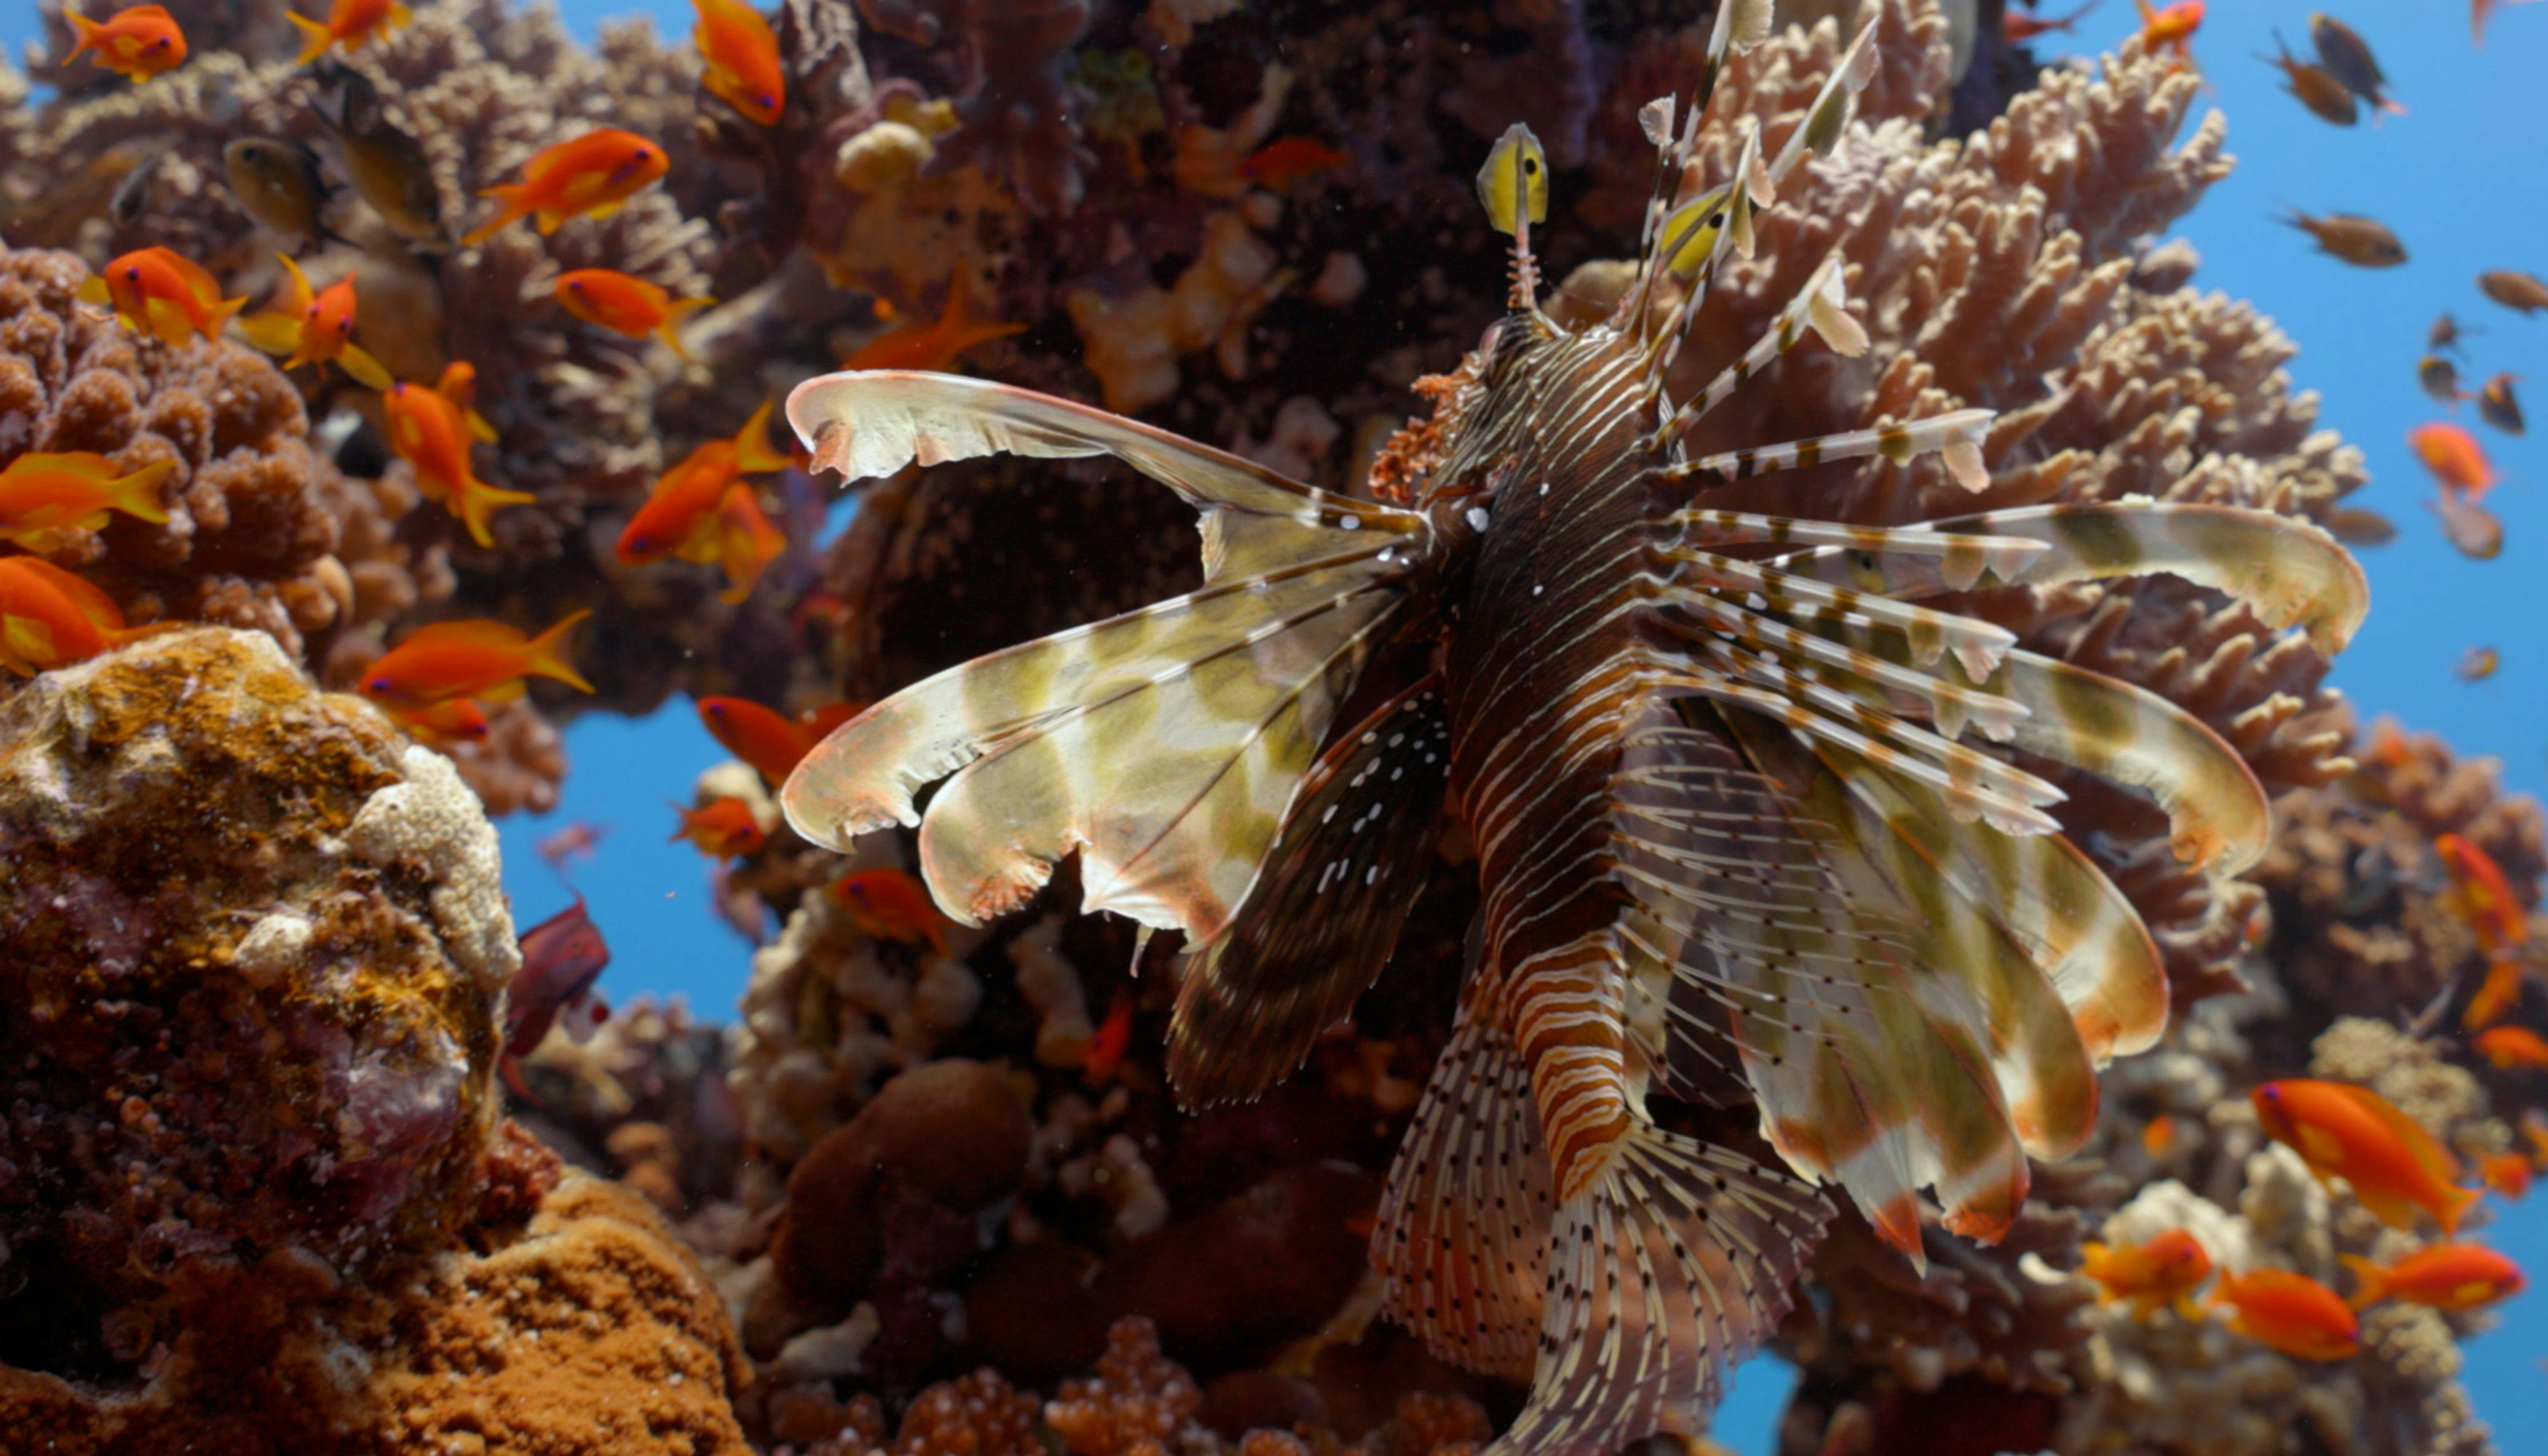 A lionfish among a coral reef